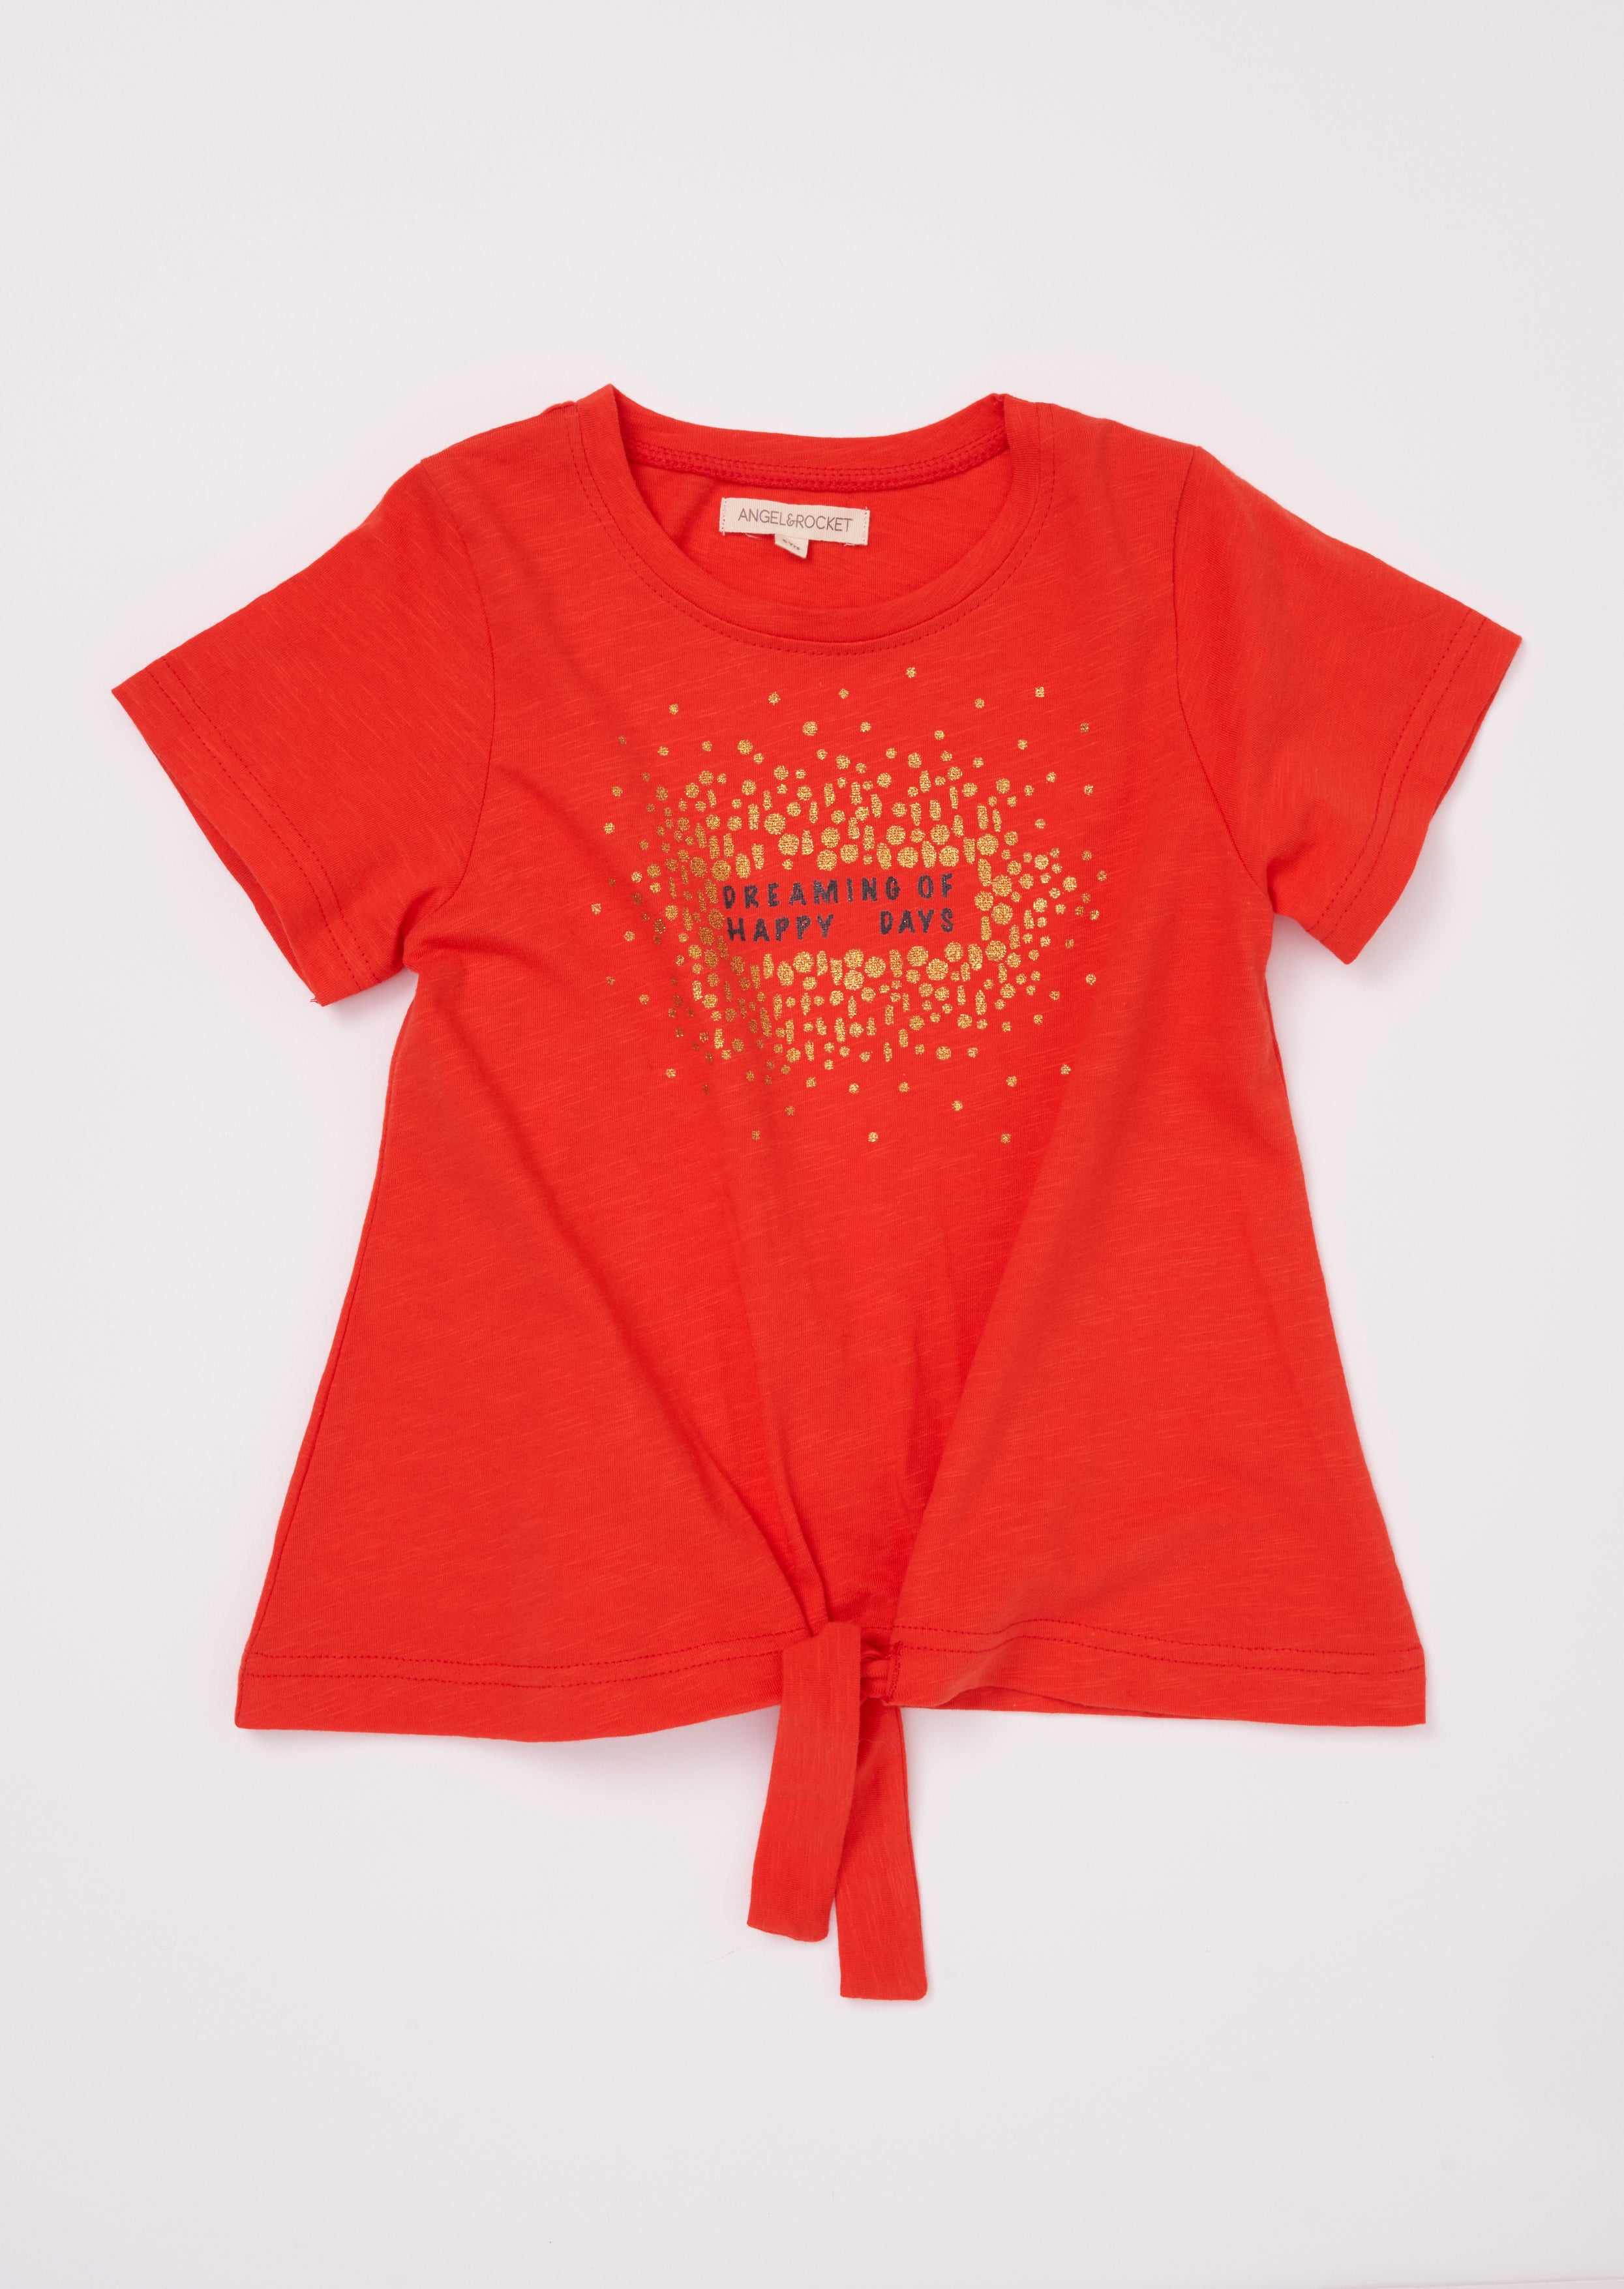 Girls Happiness Printed Red T-Shirt